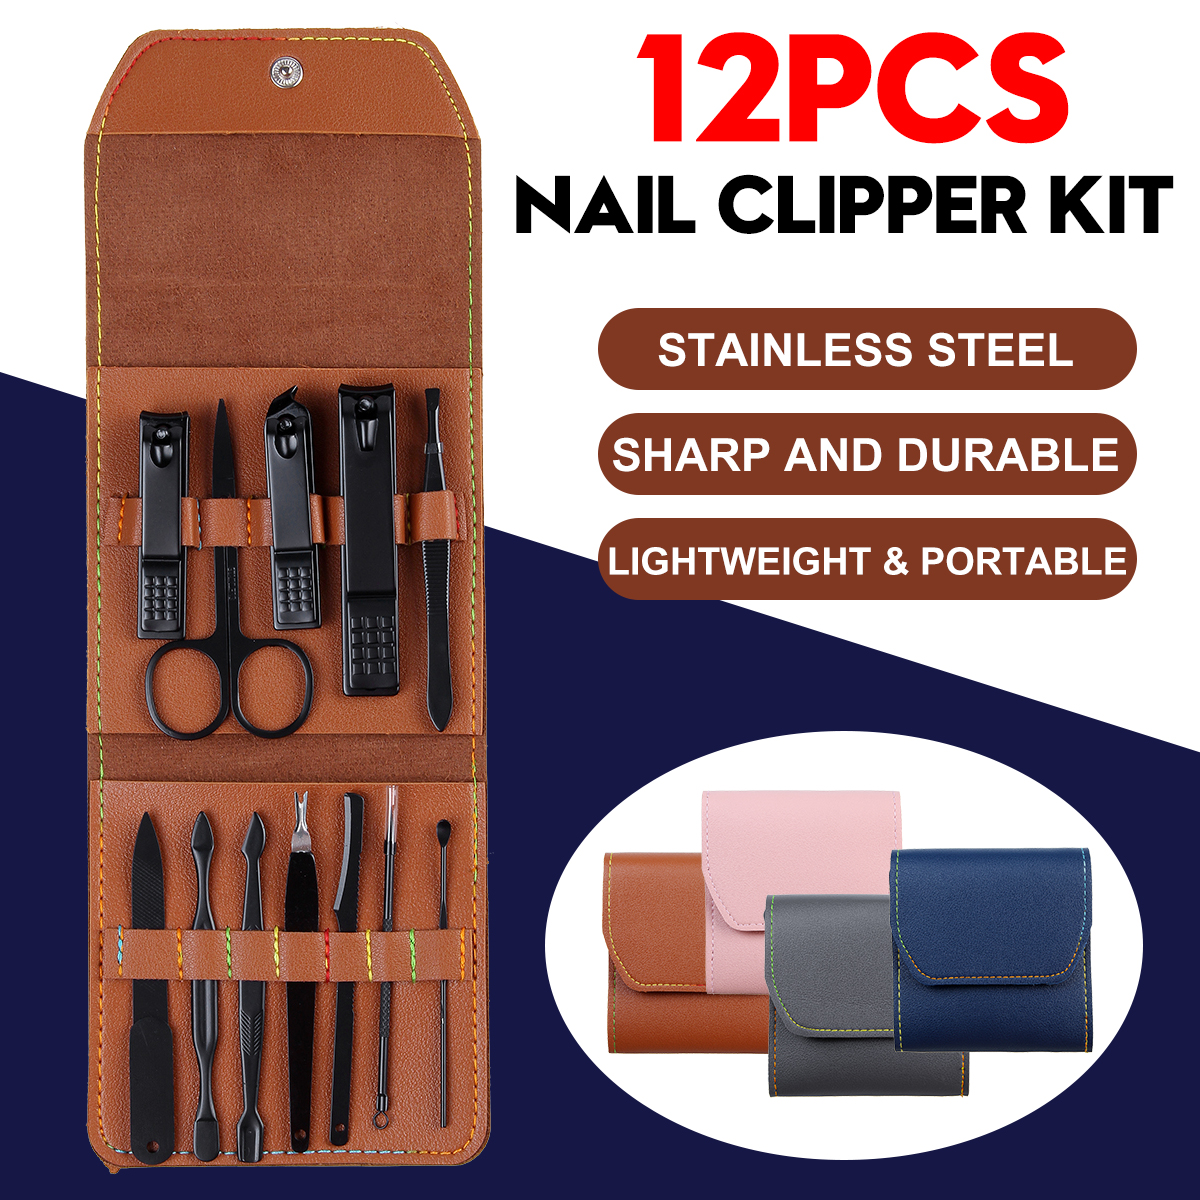 12PCS-Stainless-Steel-Pedicure-Nail-Clipper-Set-Professional-Manicure-Beauty-Tools-Kit-Cuticle-Eagle-1709212-1